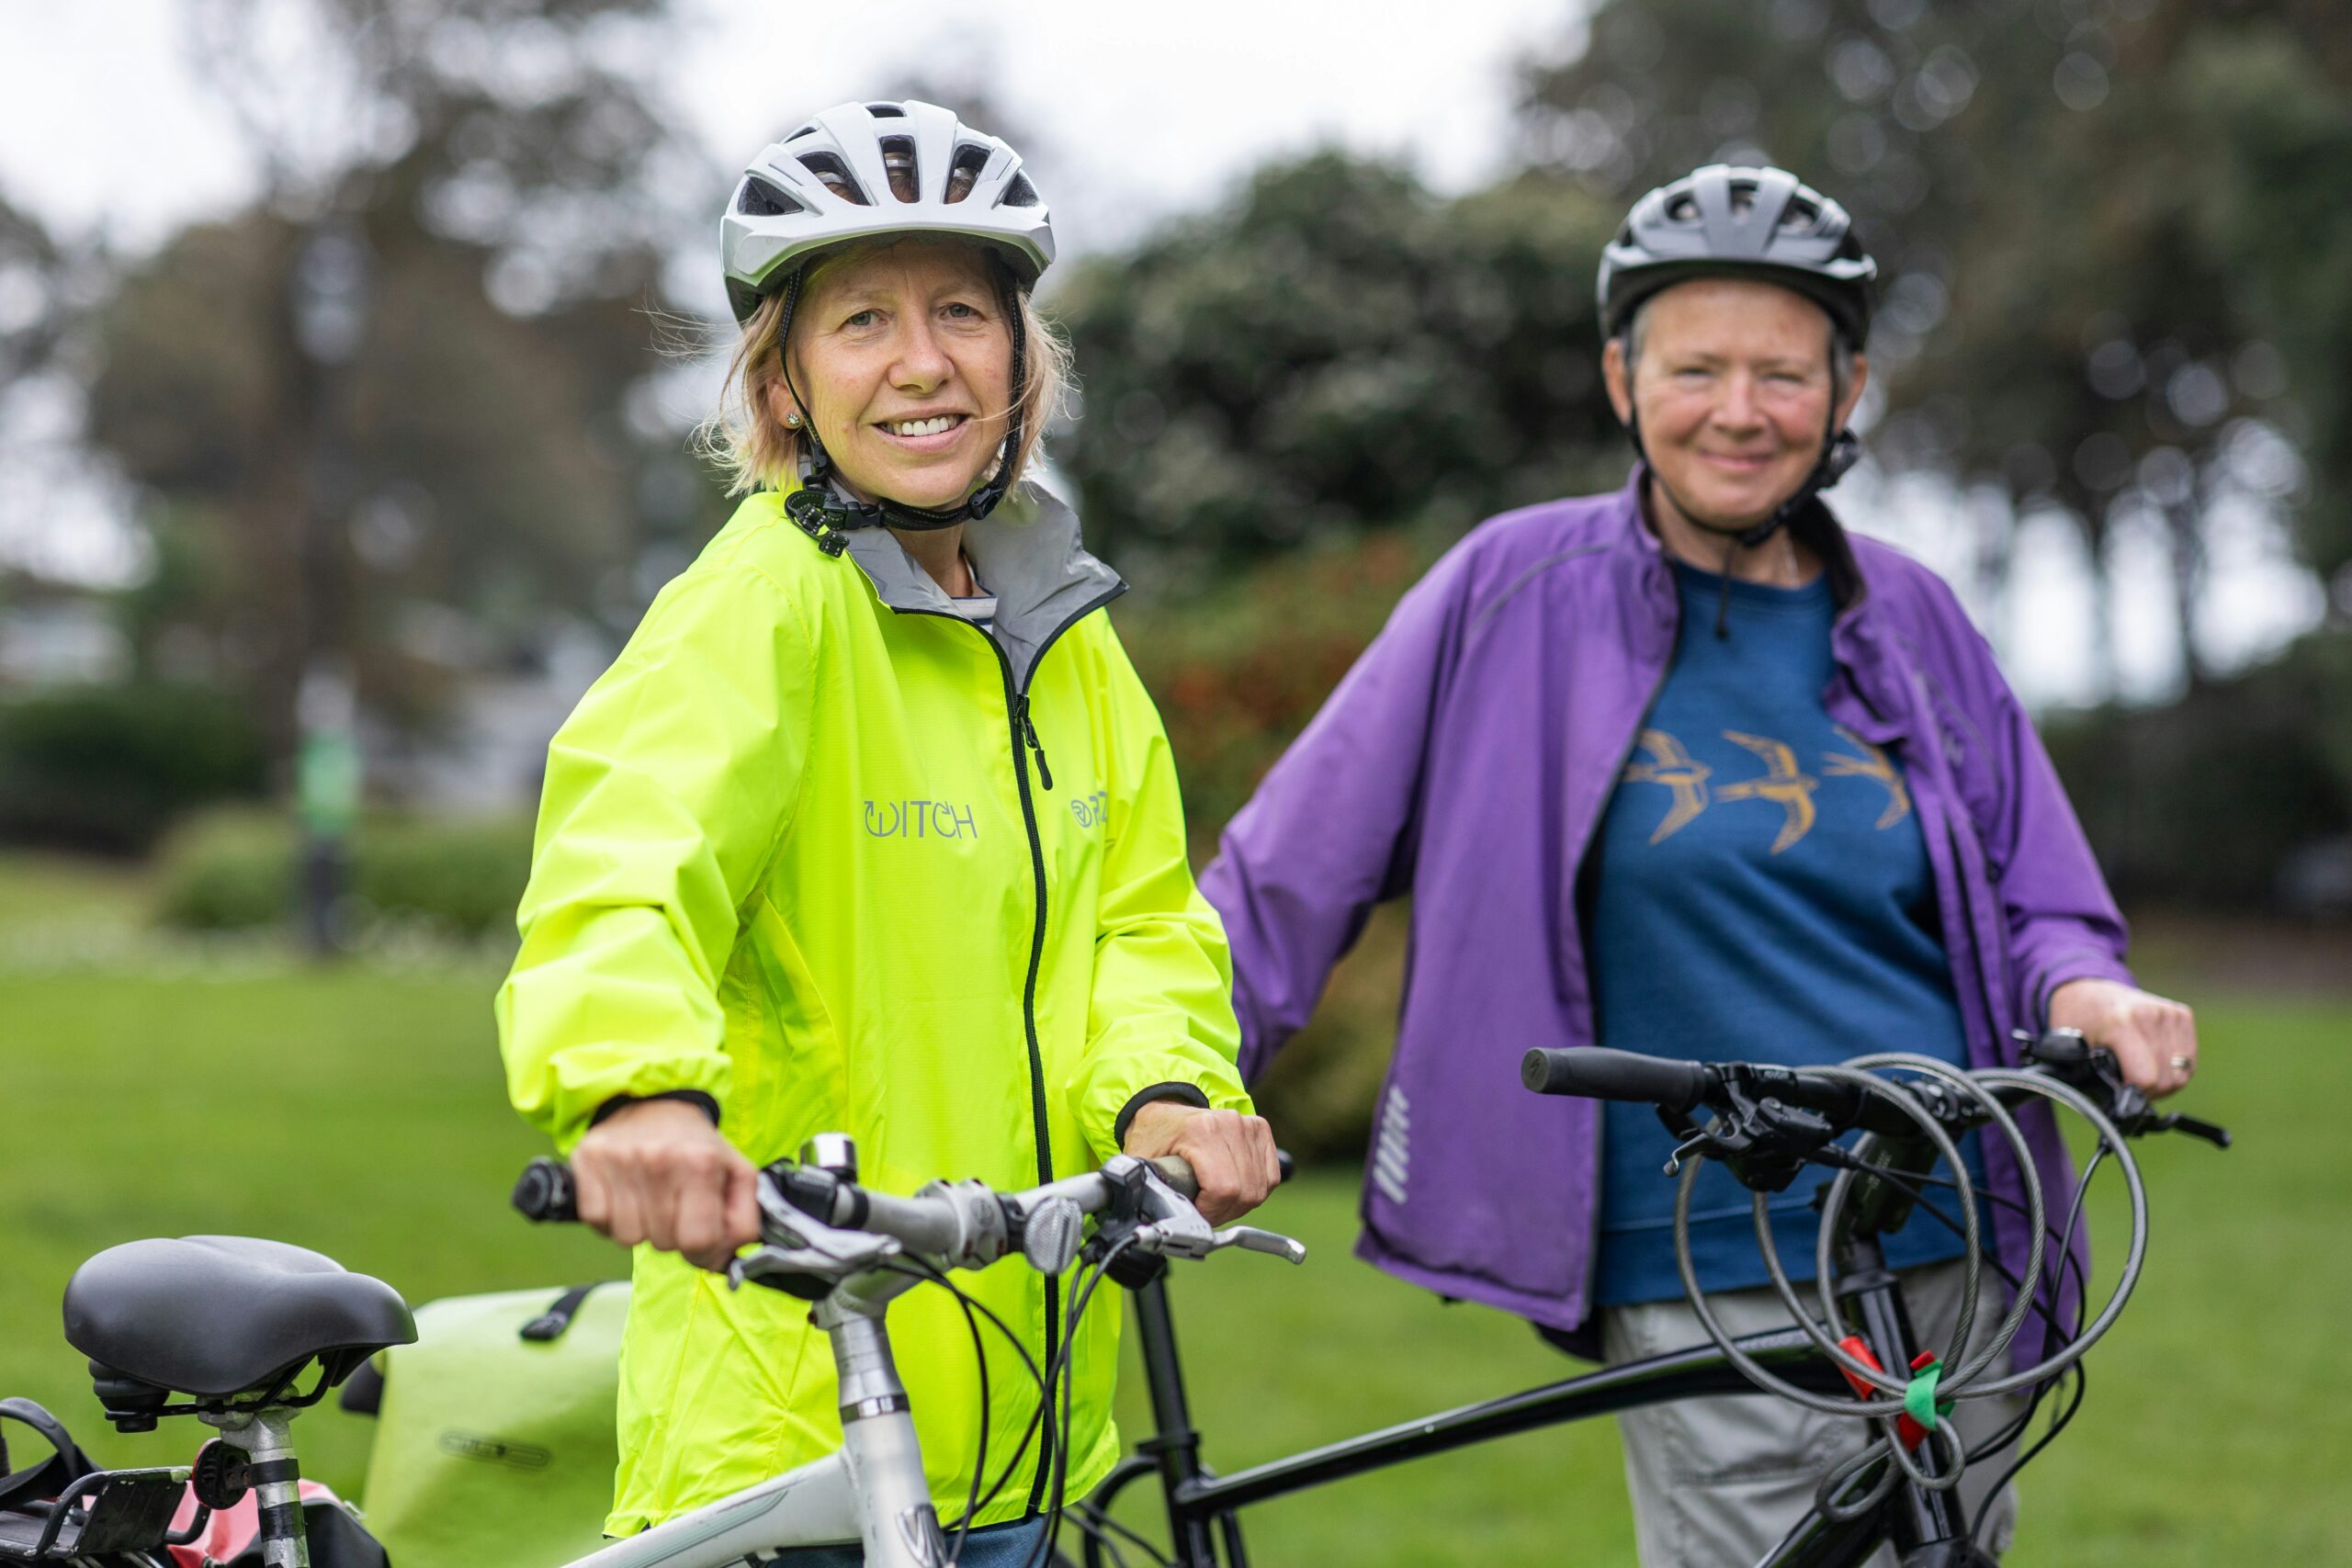 Two older women riding a bike with helmets